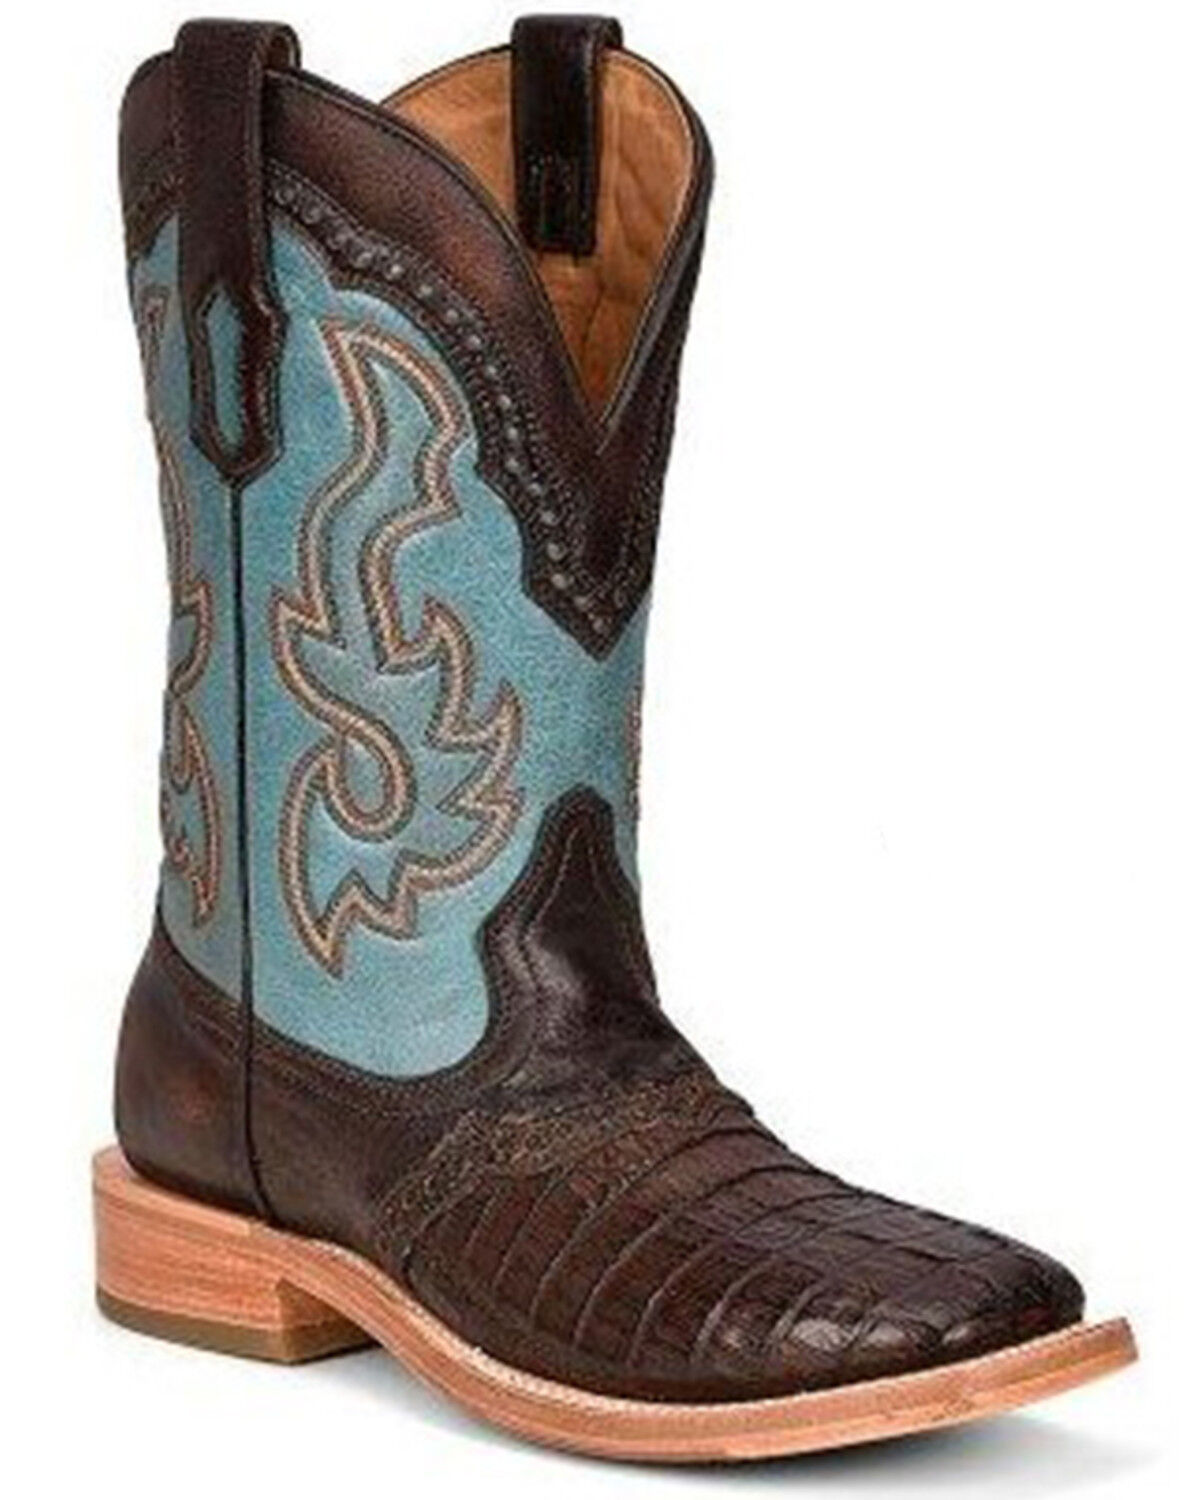 Men's New TW Crocodile Alligator Tail Leather Cowboy Western Square Boots Brown 